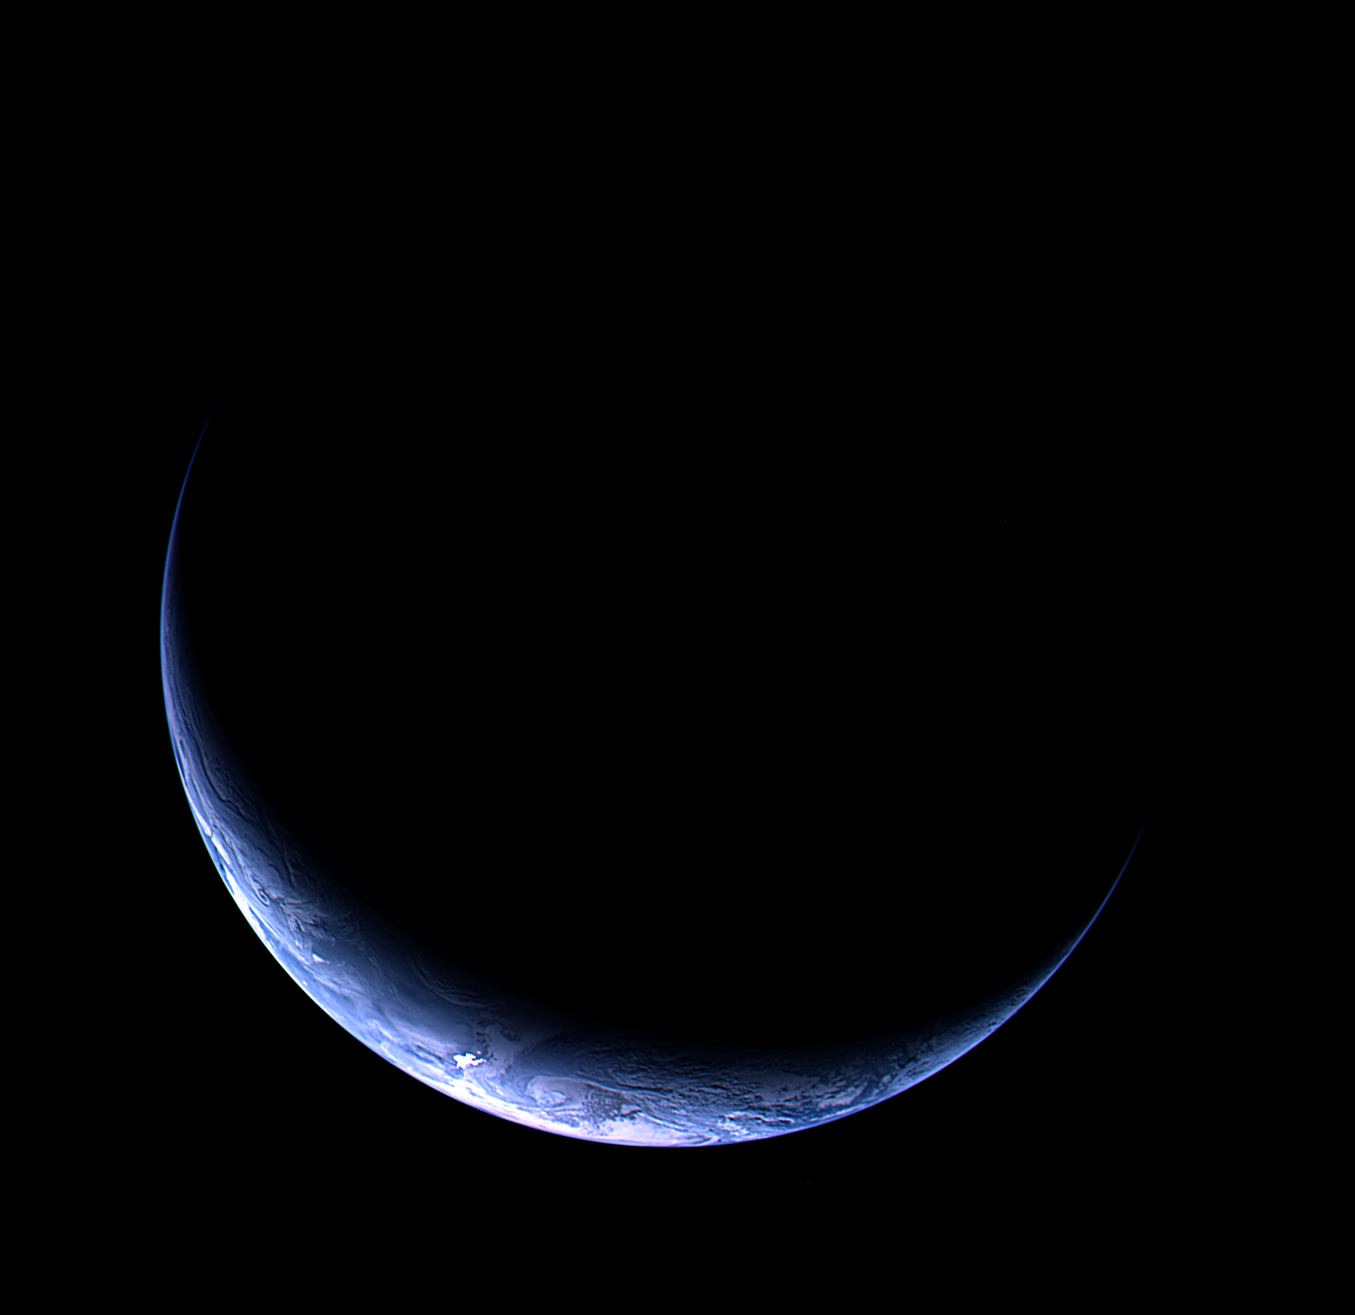 Apod November Crescent Earth From The Departing